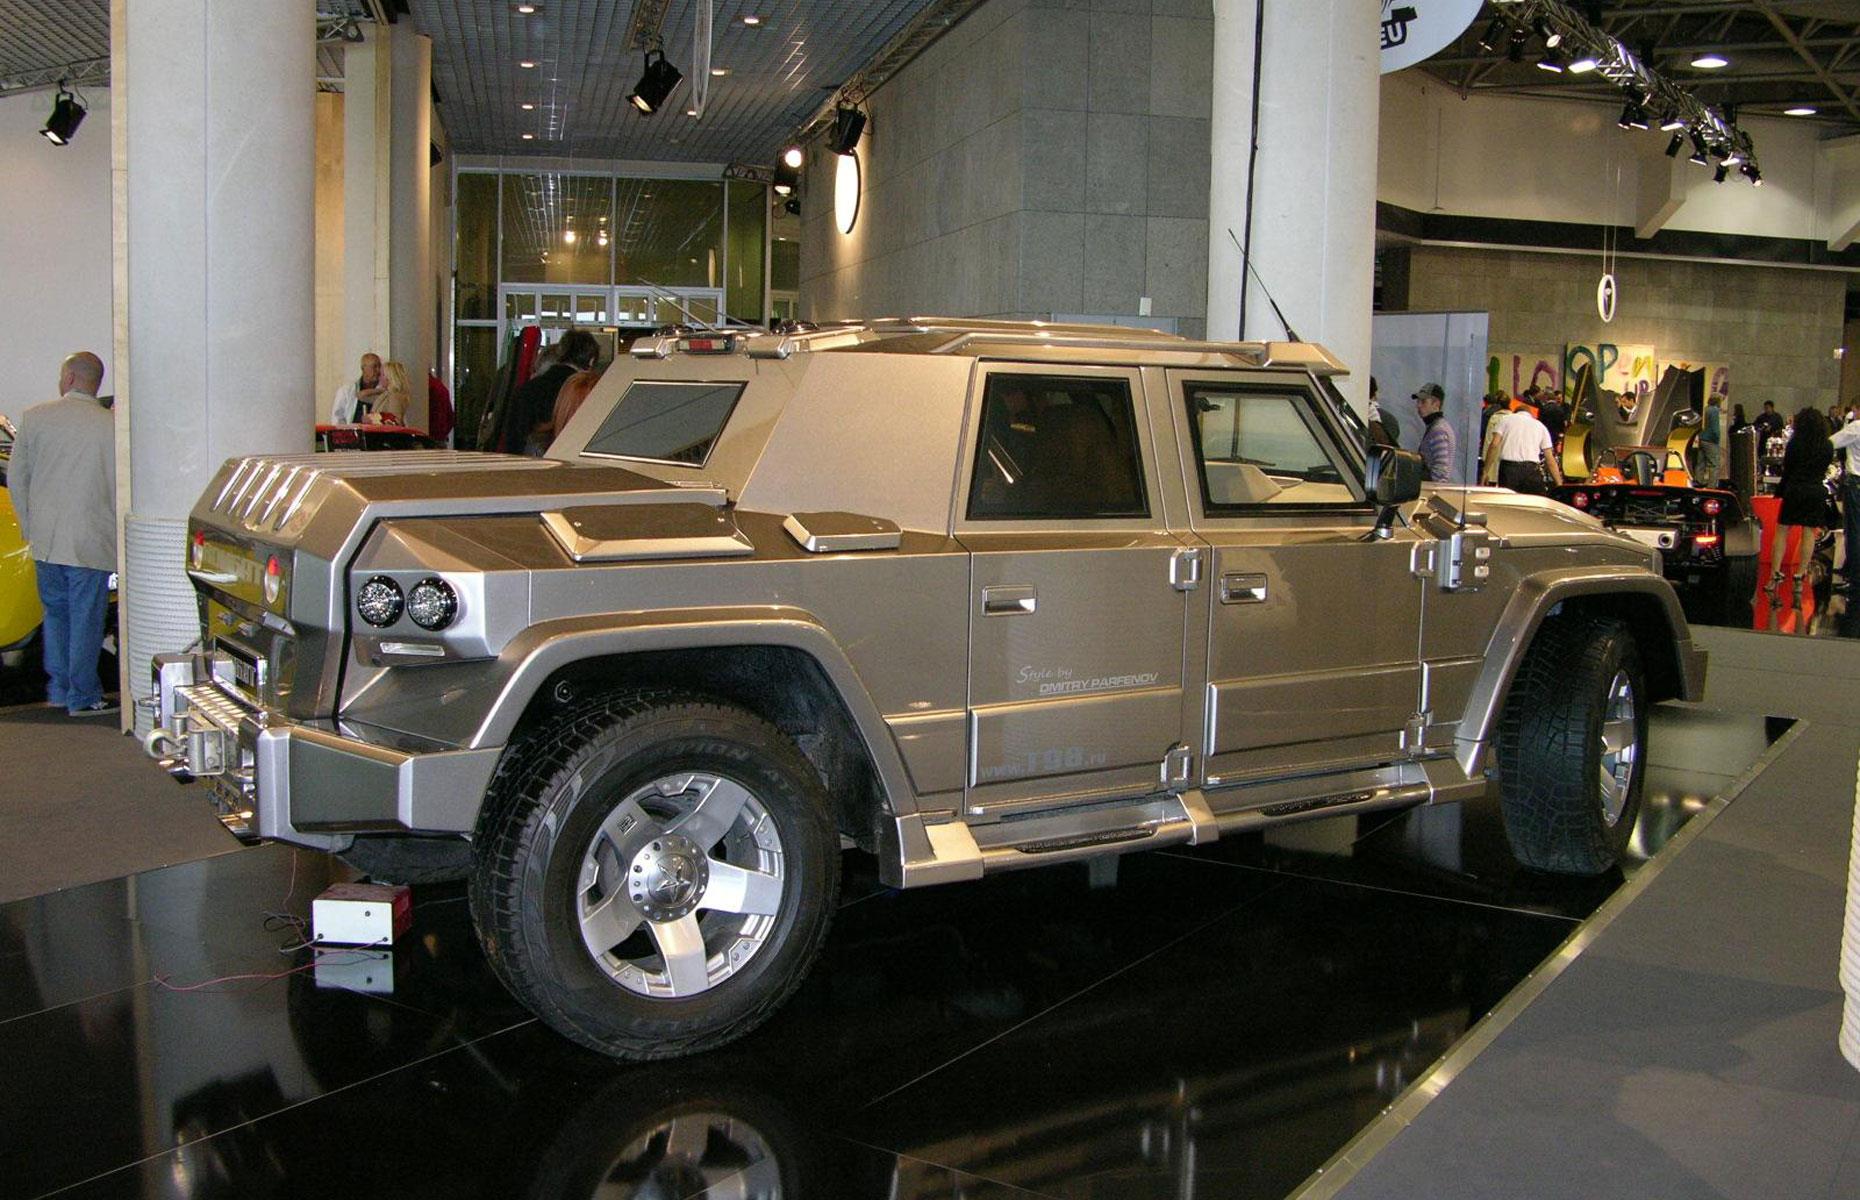 Jay-Z possesses one of the most enviable collections of cars in the world. The billionaire hip-hop magnate has a multitude of spectacular motors in his no doubt colossal garage, including an armoured Dartz Prombron SUV. The rap icon is reported to have paid $1.3 million (£1m) for the extra-tough vehicle.